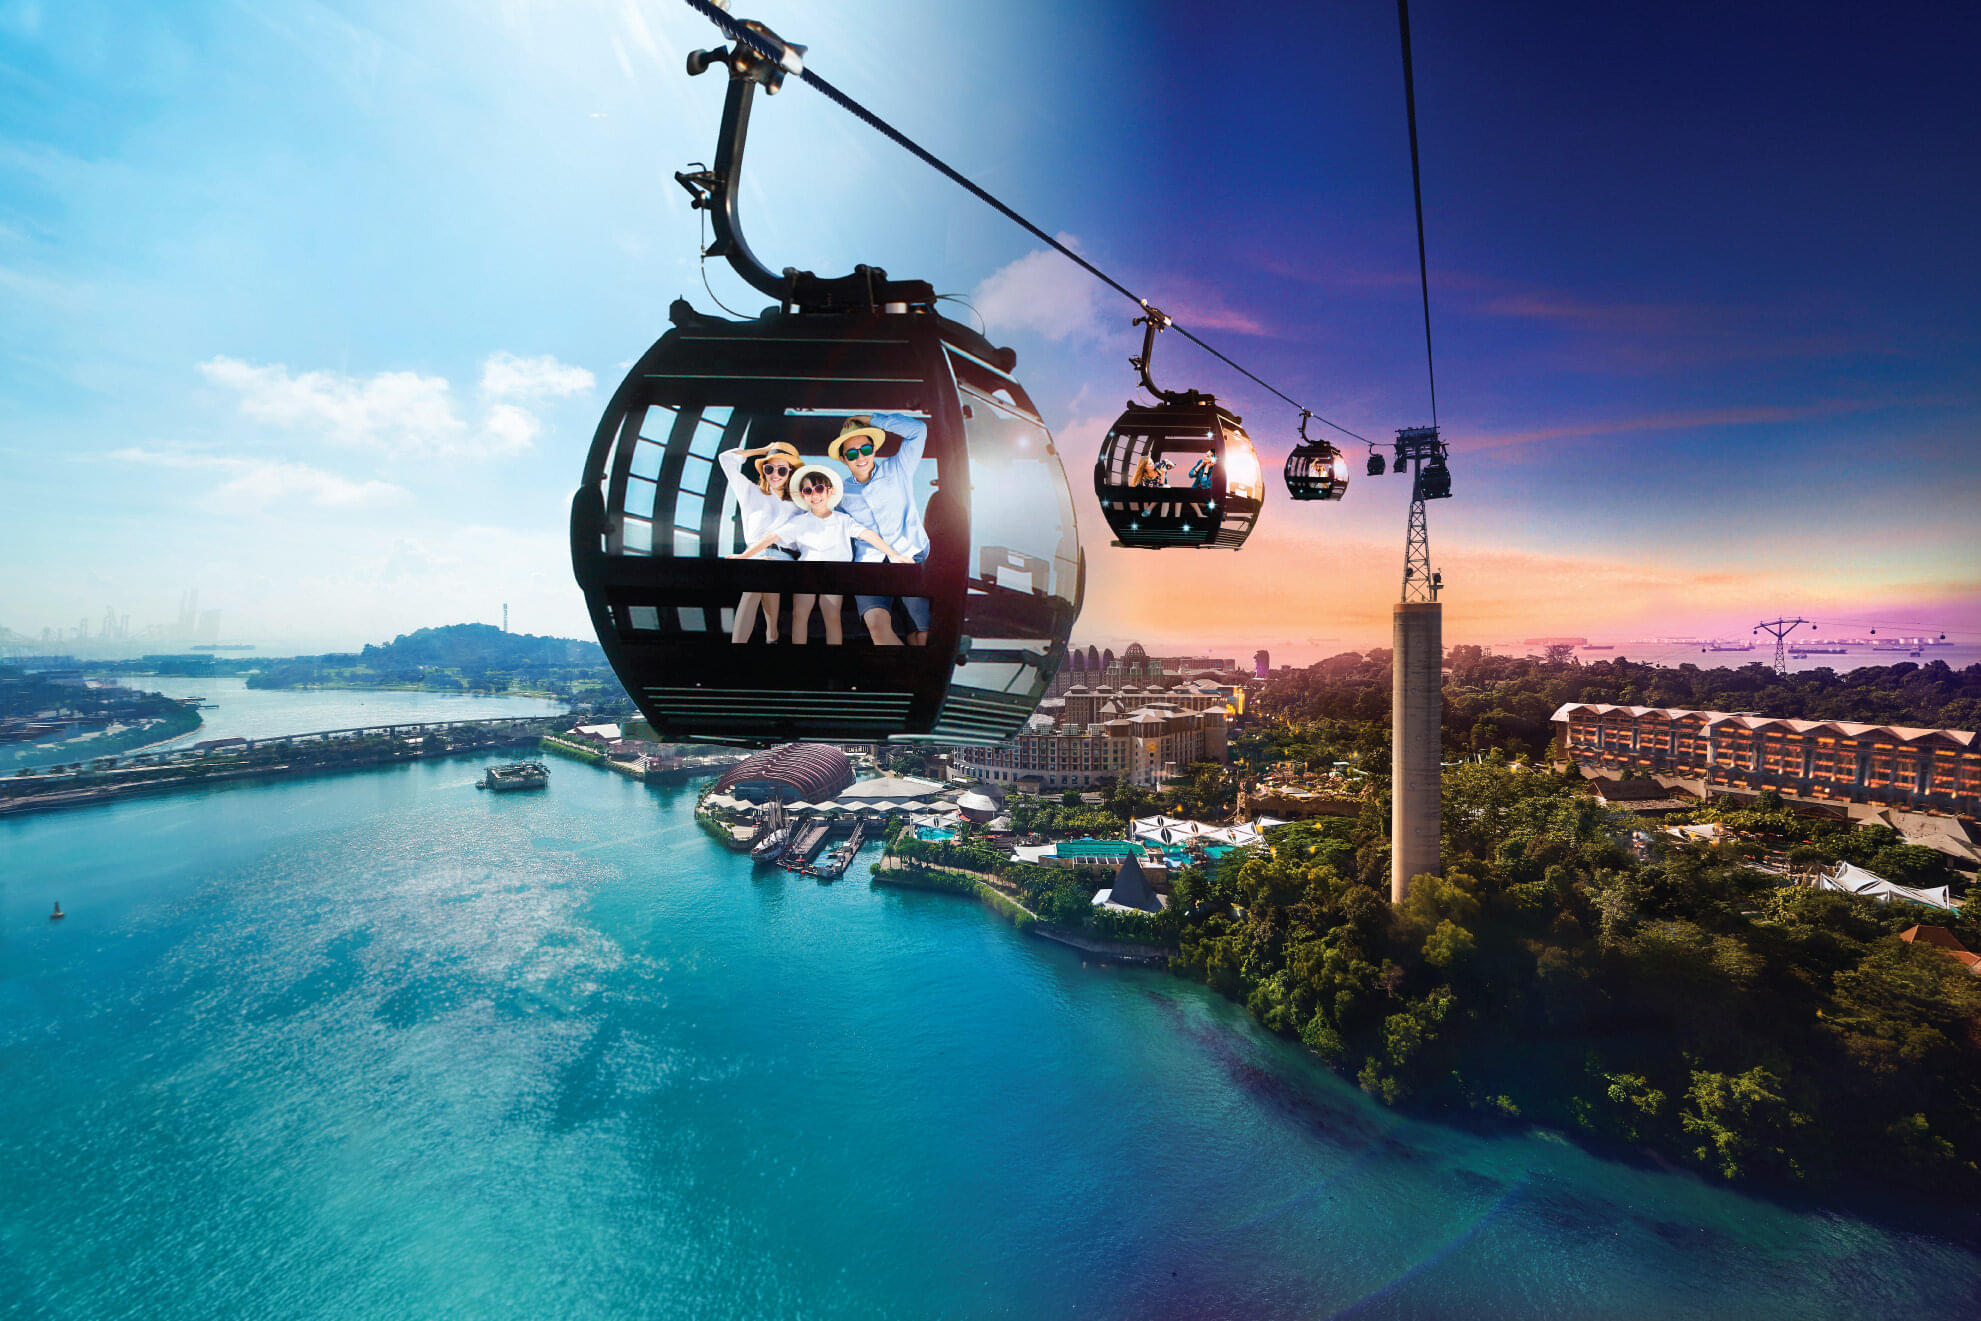 Witness the Attractions along the Mount Faber Cable Car Line